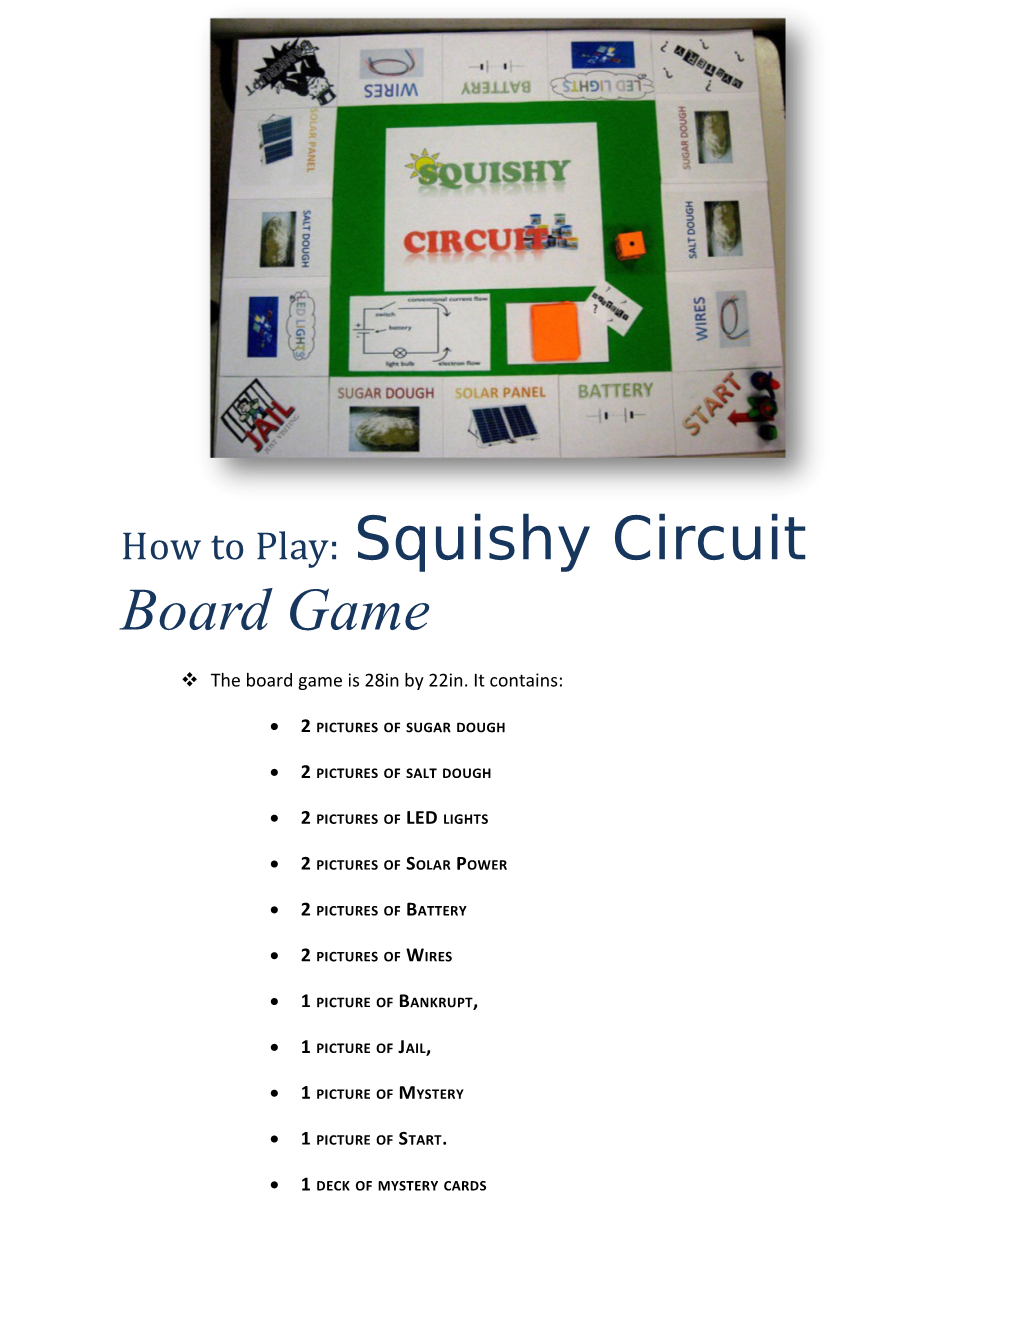 How to Play: Squishy Circuit Board Game